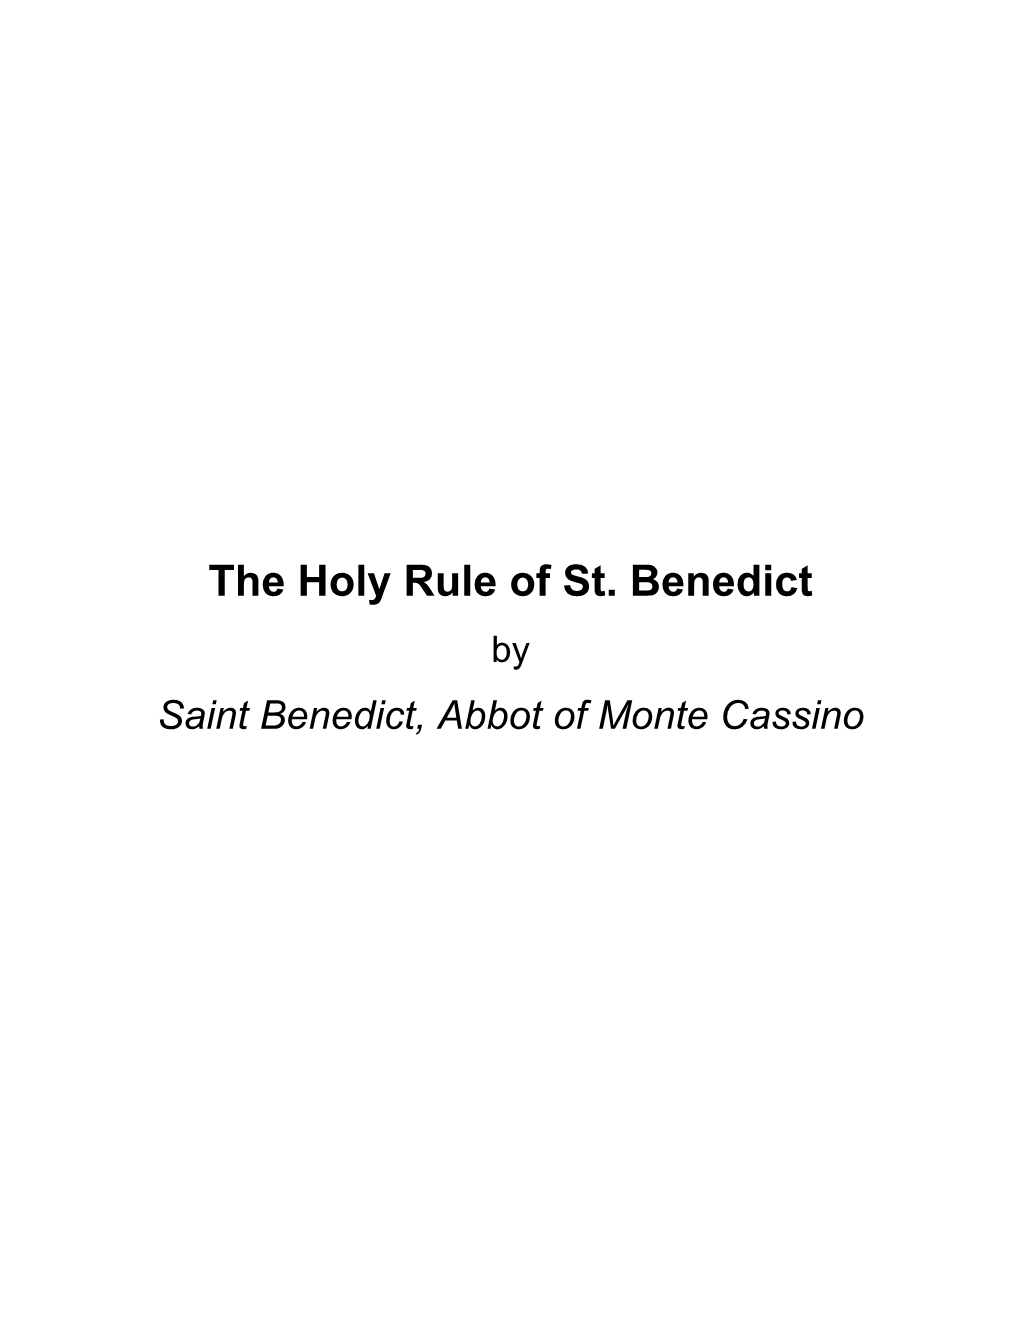 About the Holy Rule of St. Benedict by Saint Benedict, Abbot of Monte Cassino